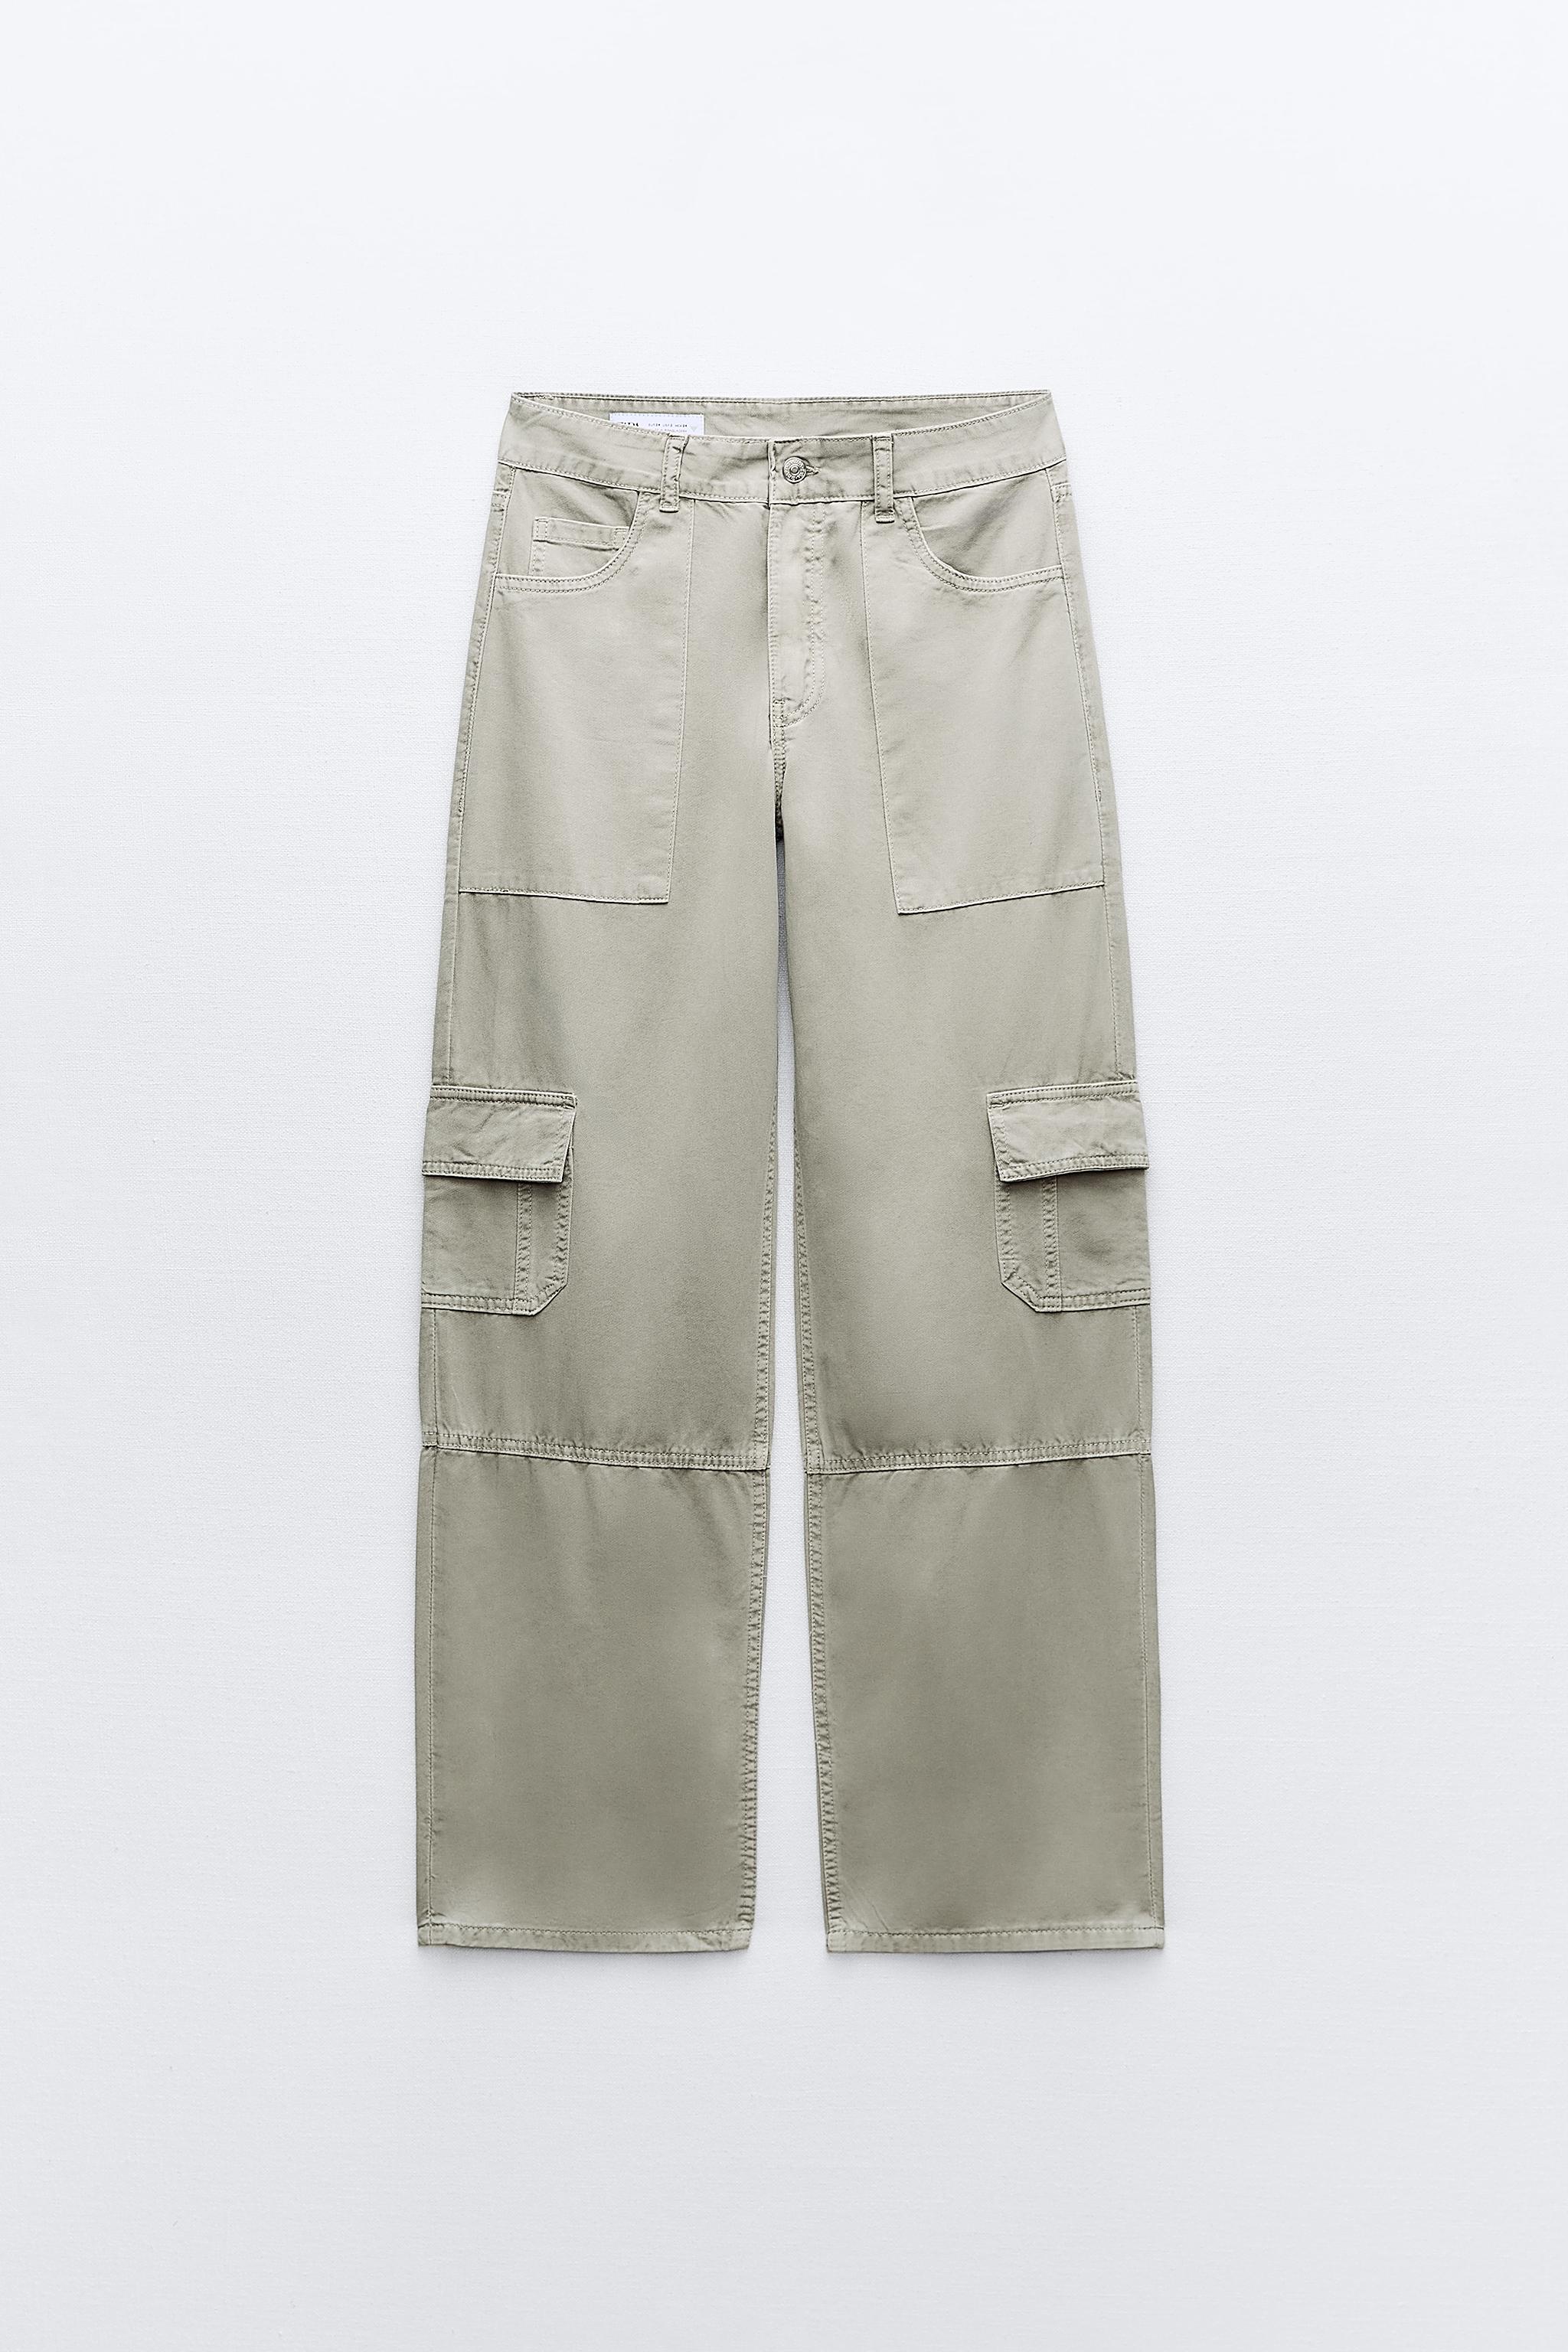 Remember these men's cargo pants from Zara?? Well they are back in